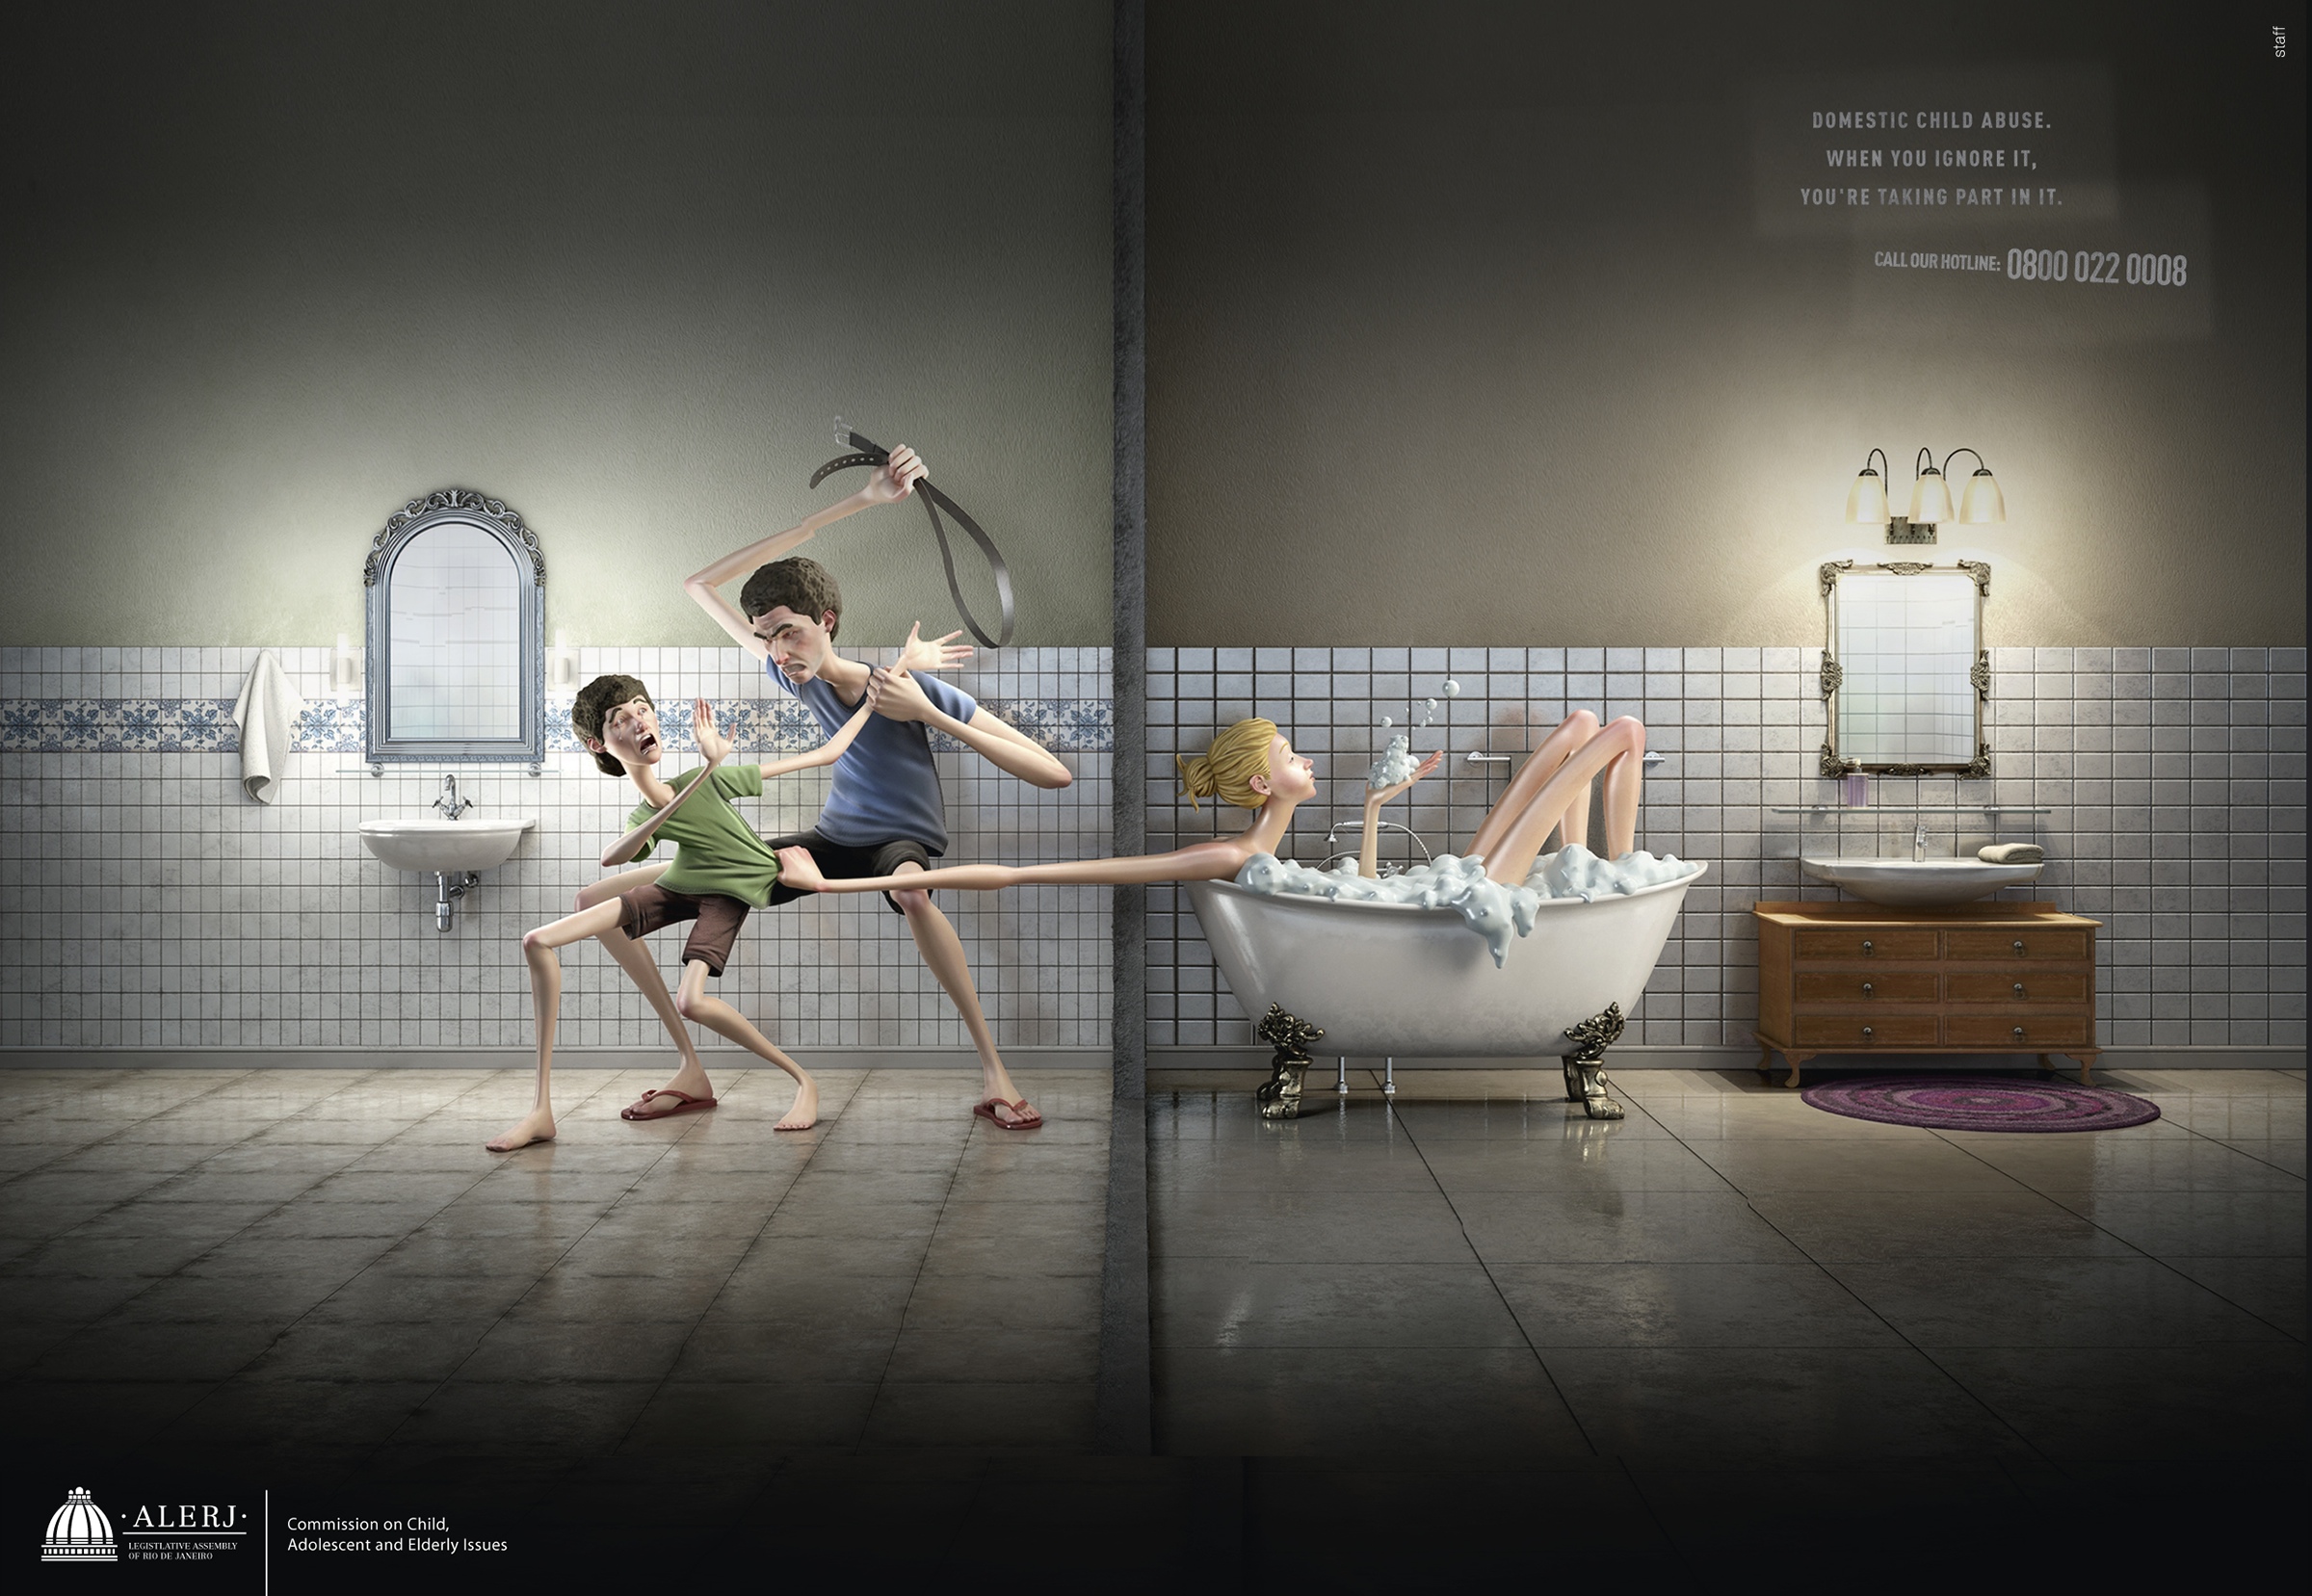 Domestic Child Abuse. When you ignore it, you’re taking part in it. Campaigns of the World®